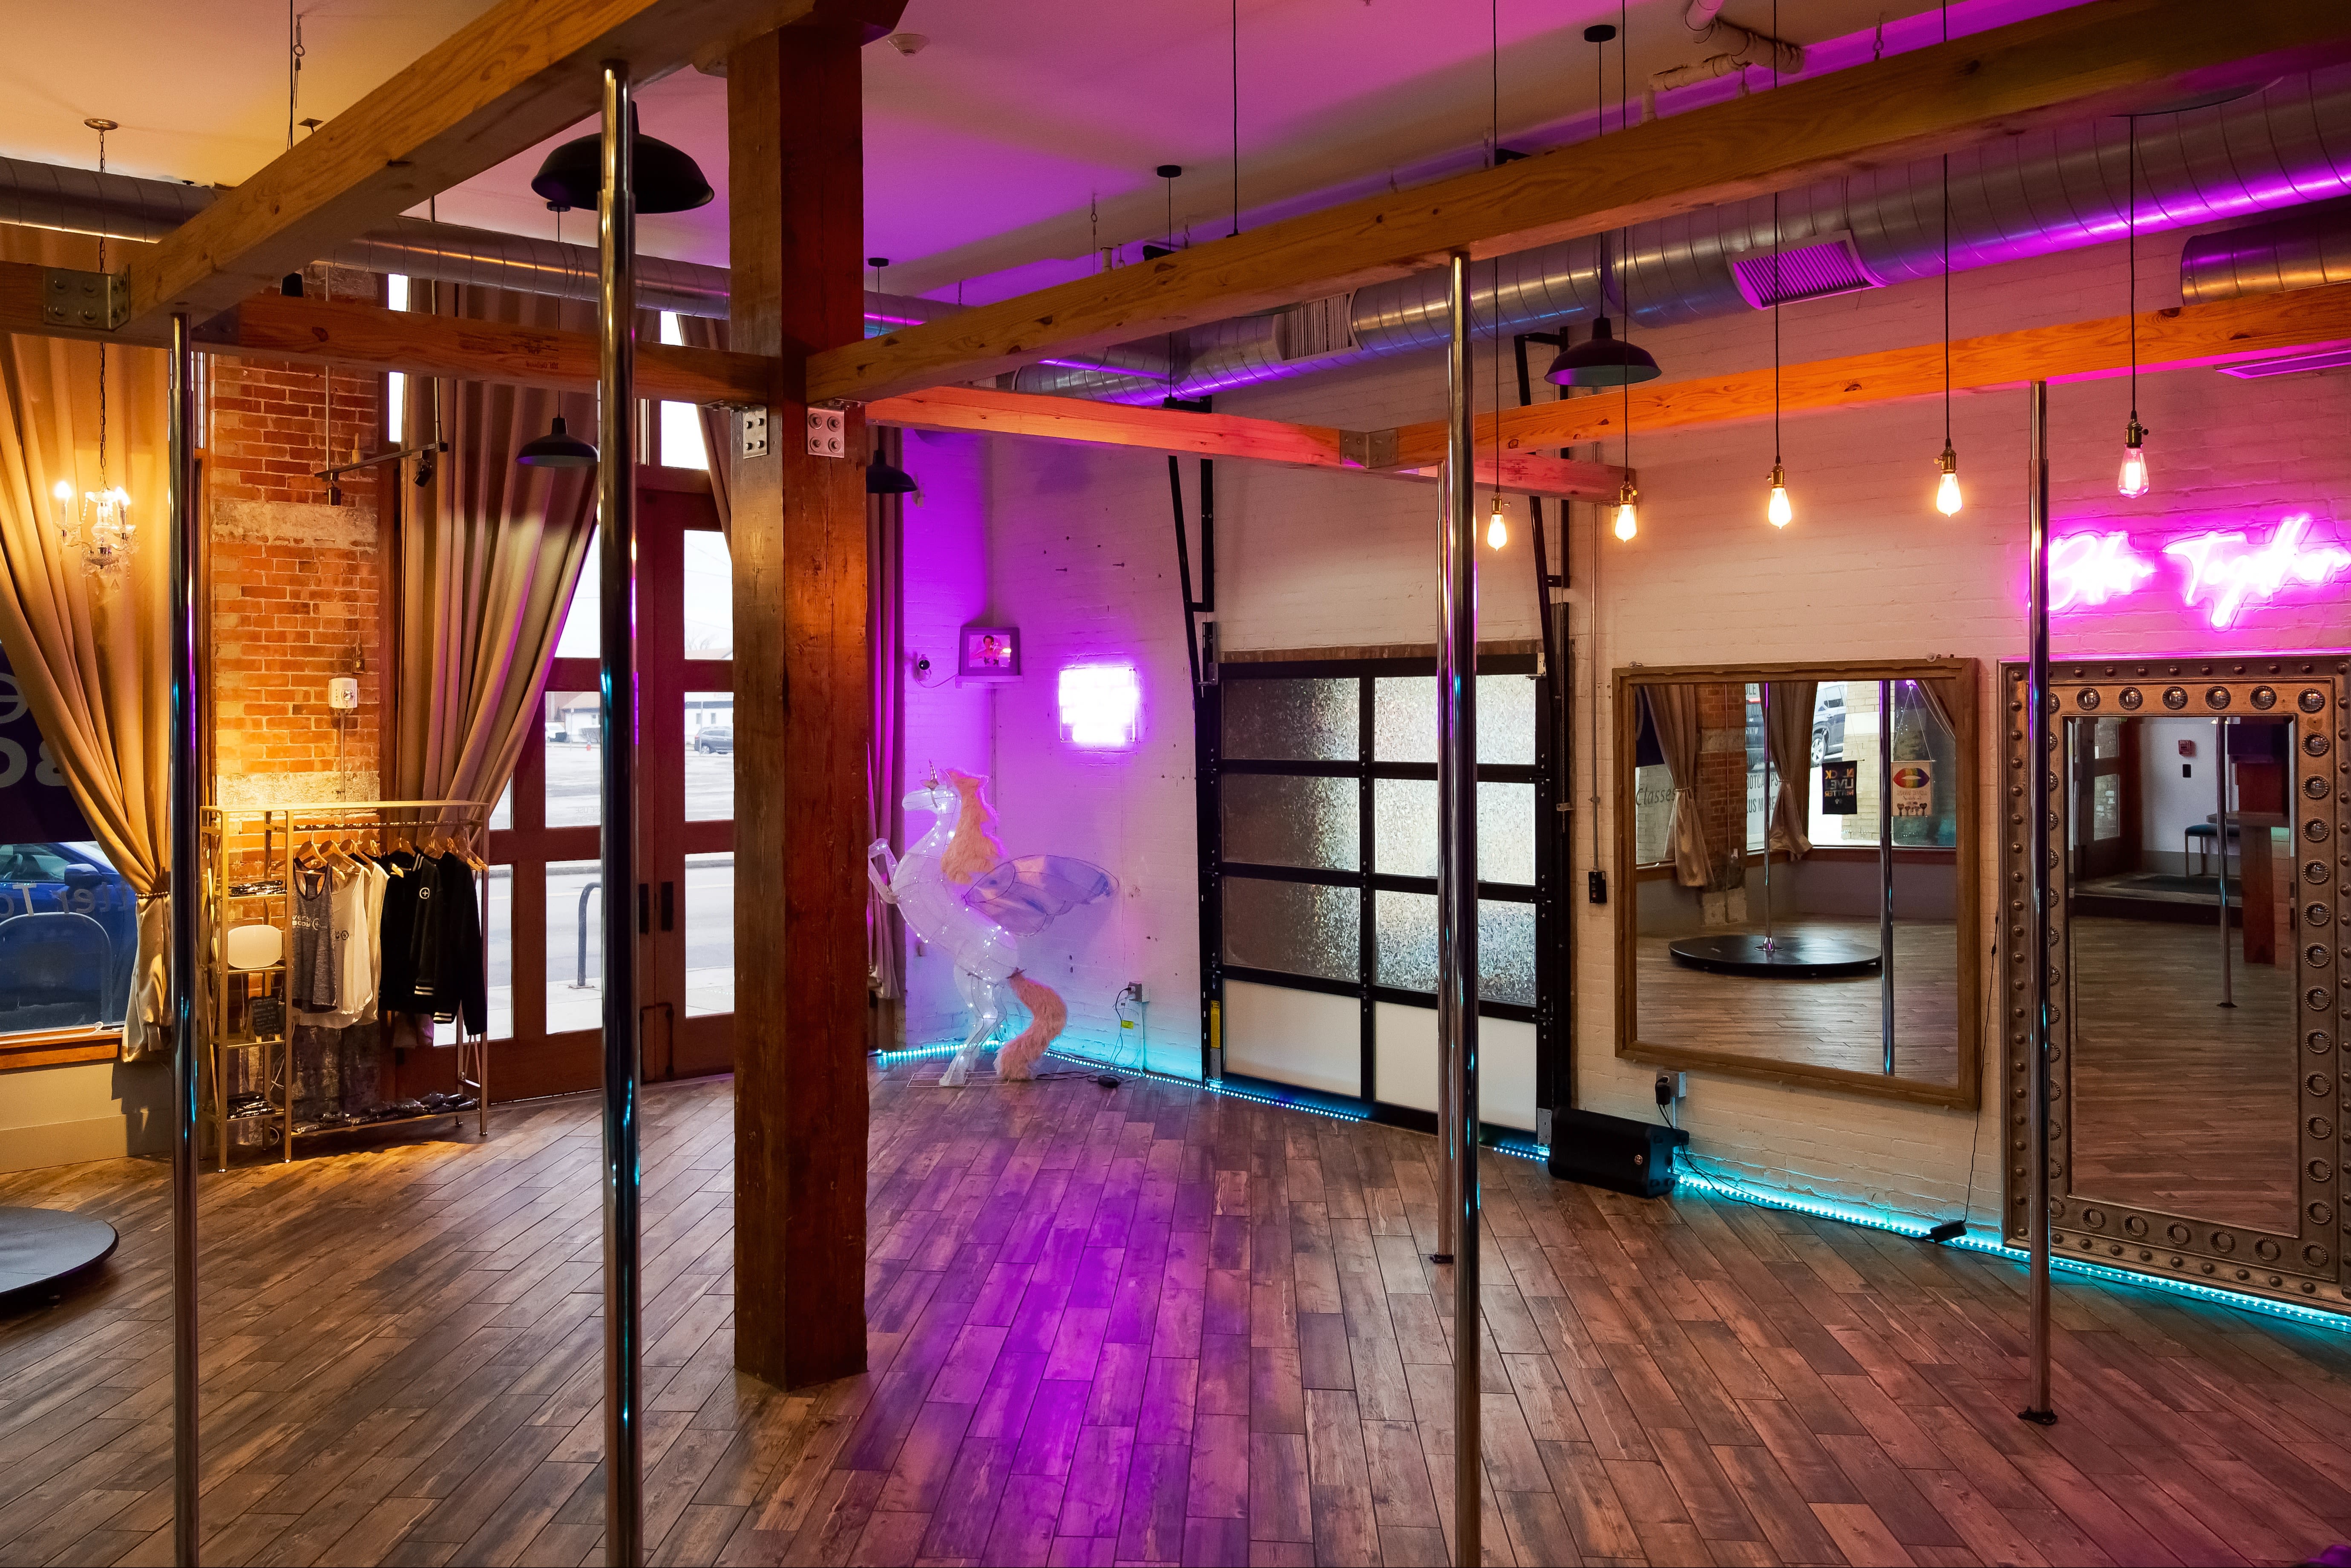 Body Barre Boutique: Read Reviews and Book Classes on ClassPass